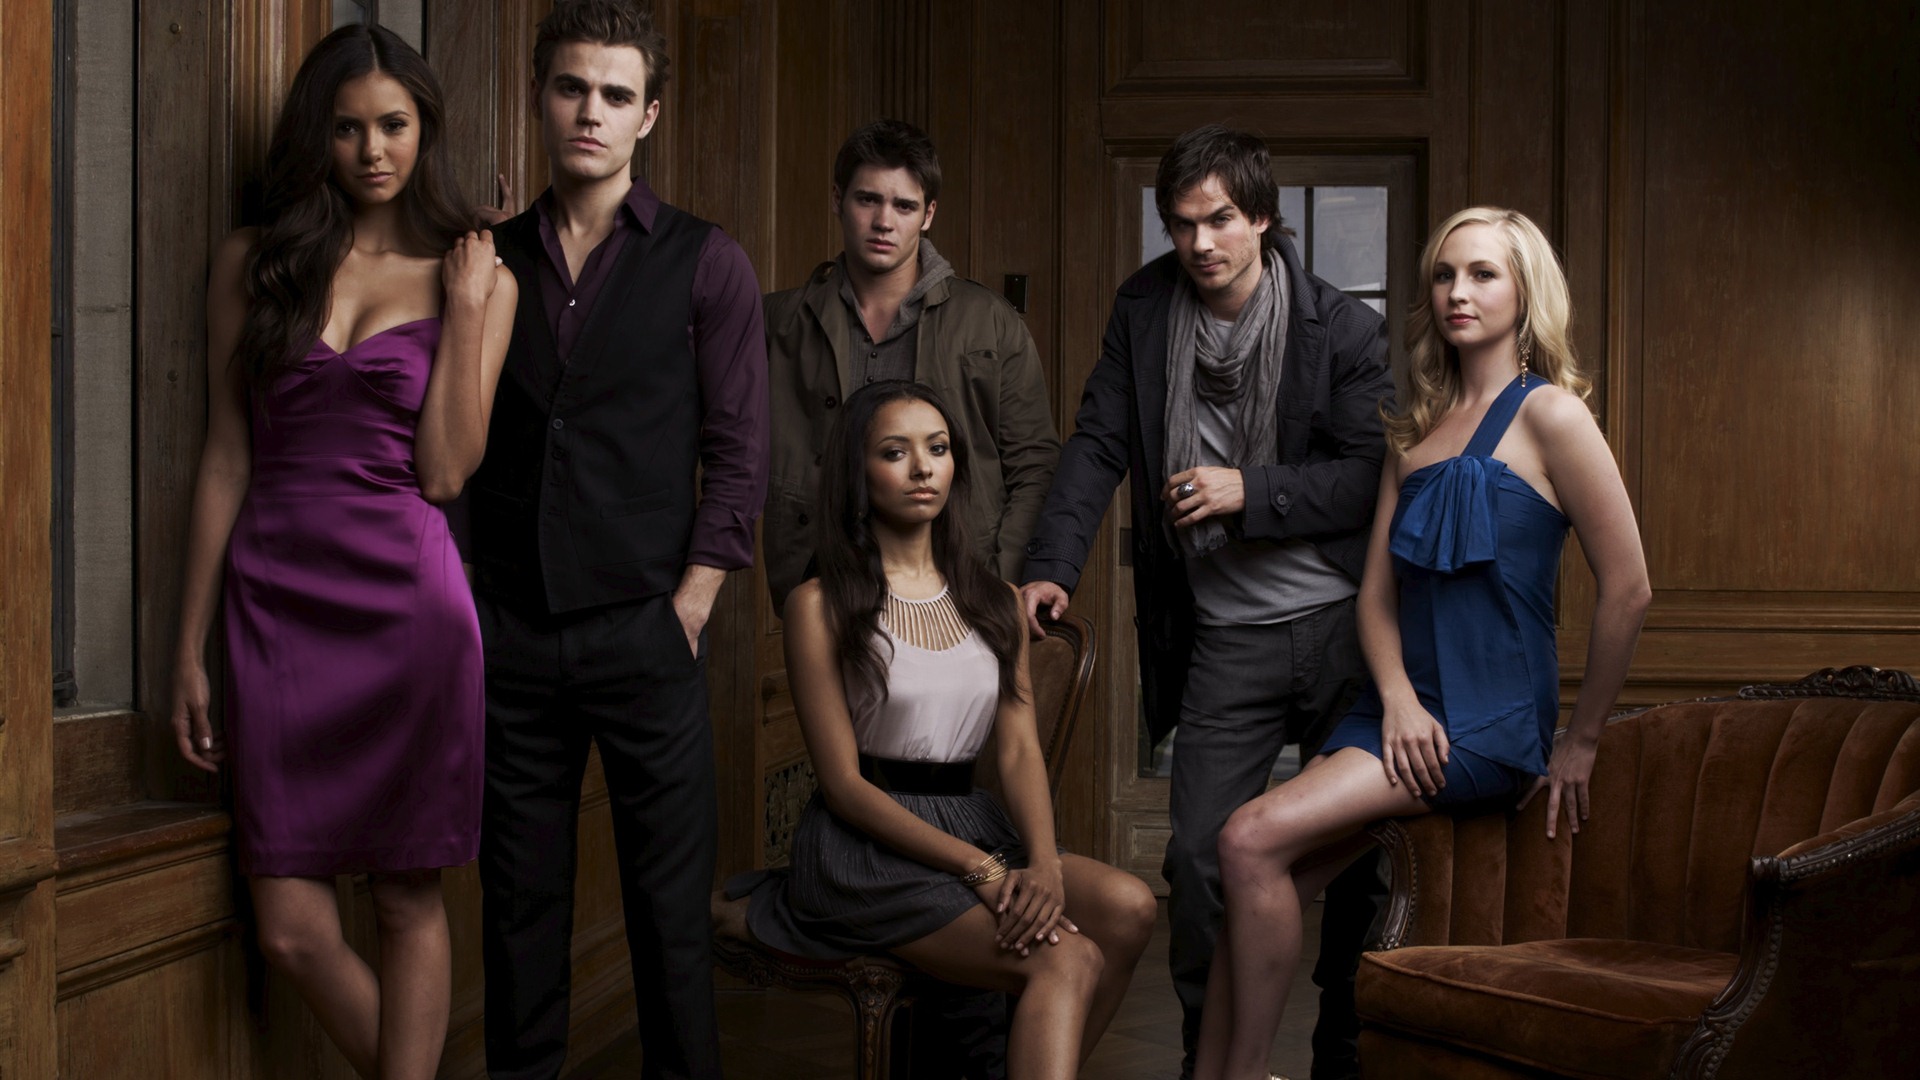 The Vampire Diaries HD wallpapers #19 - 1920x1080